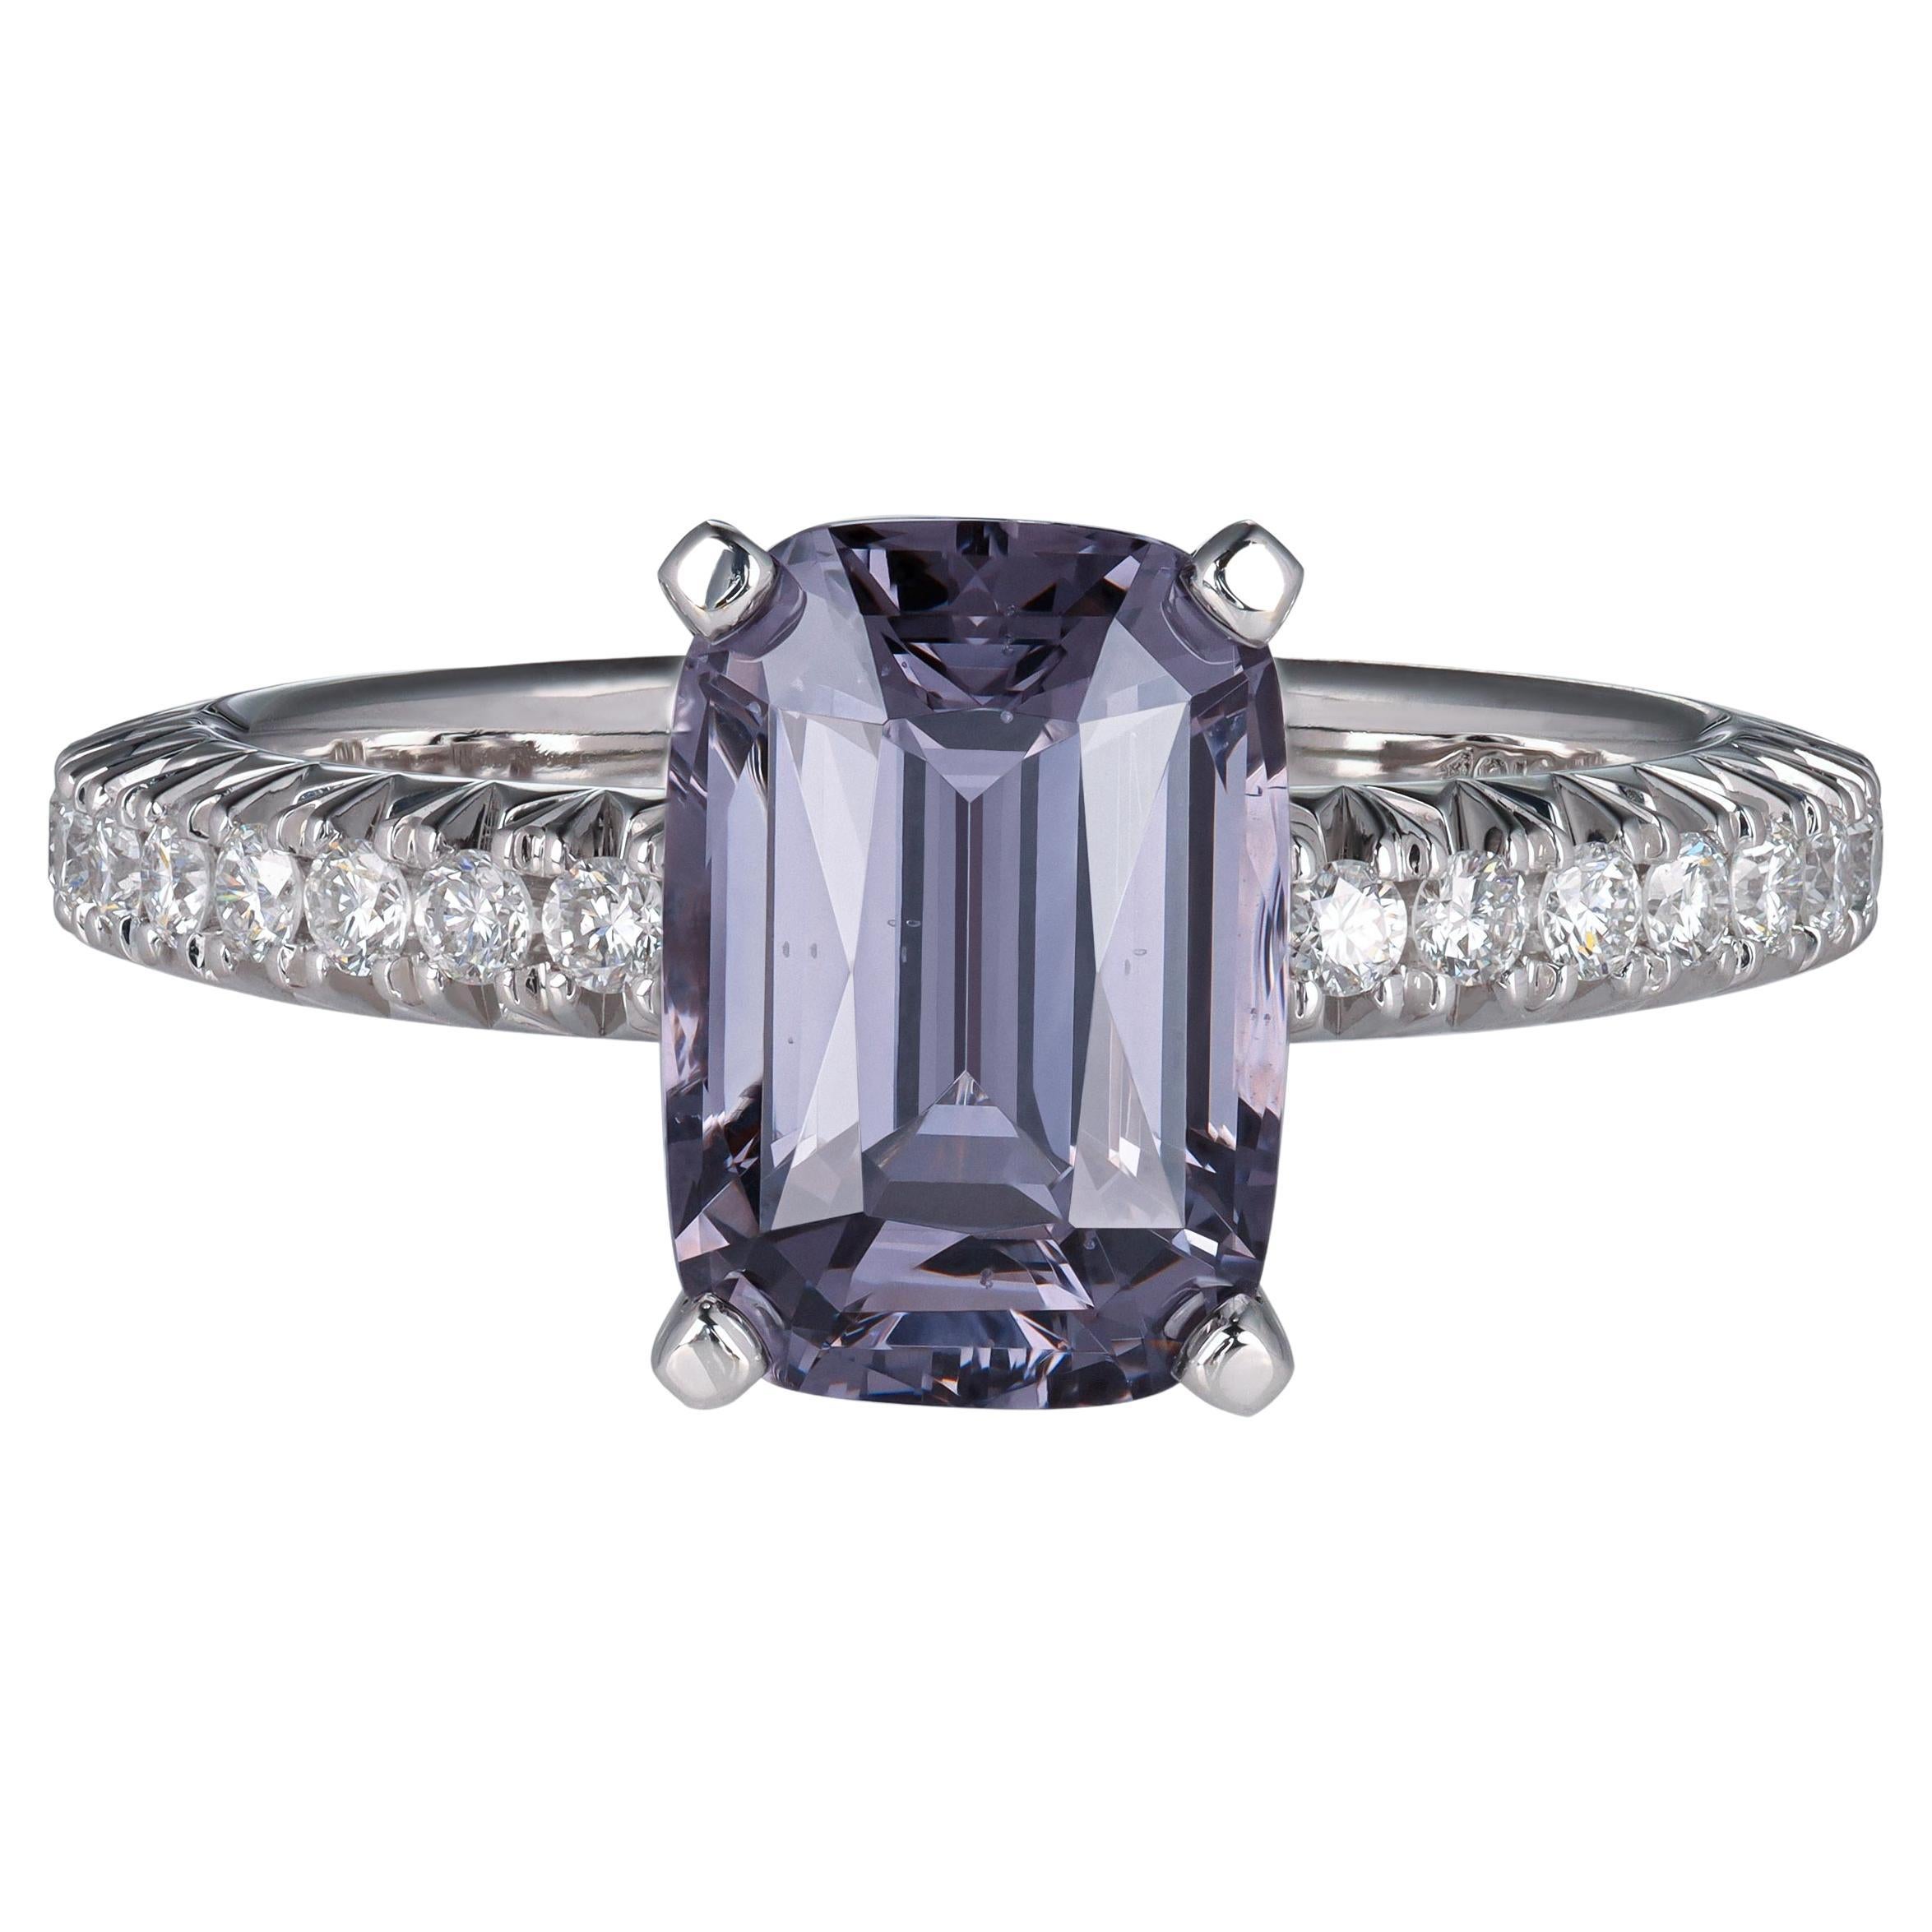 Lavender Spinel 3.41 carat Ring with diamonds in 18K white gold For Sale